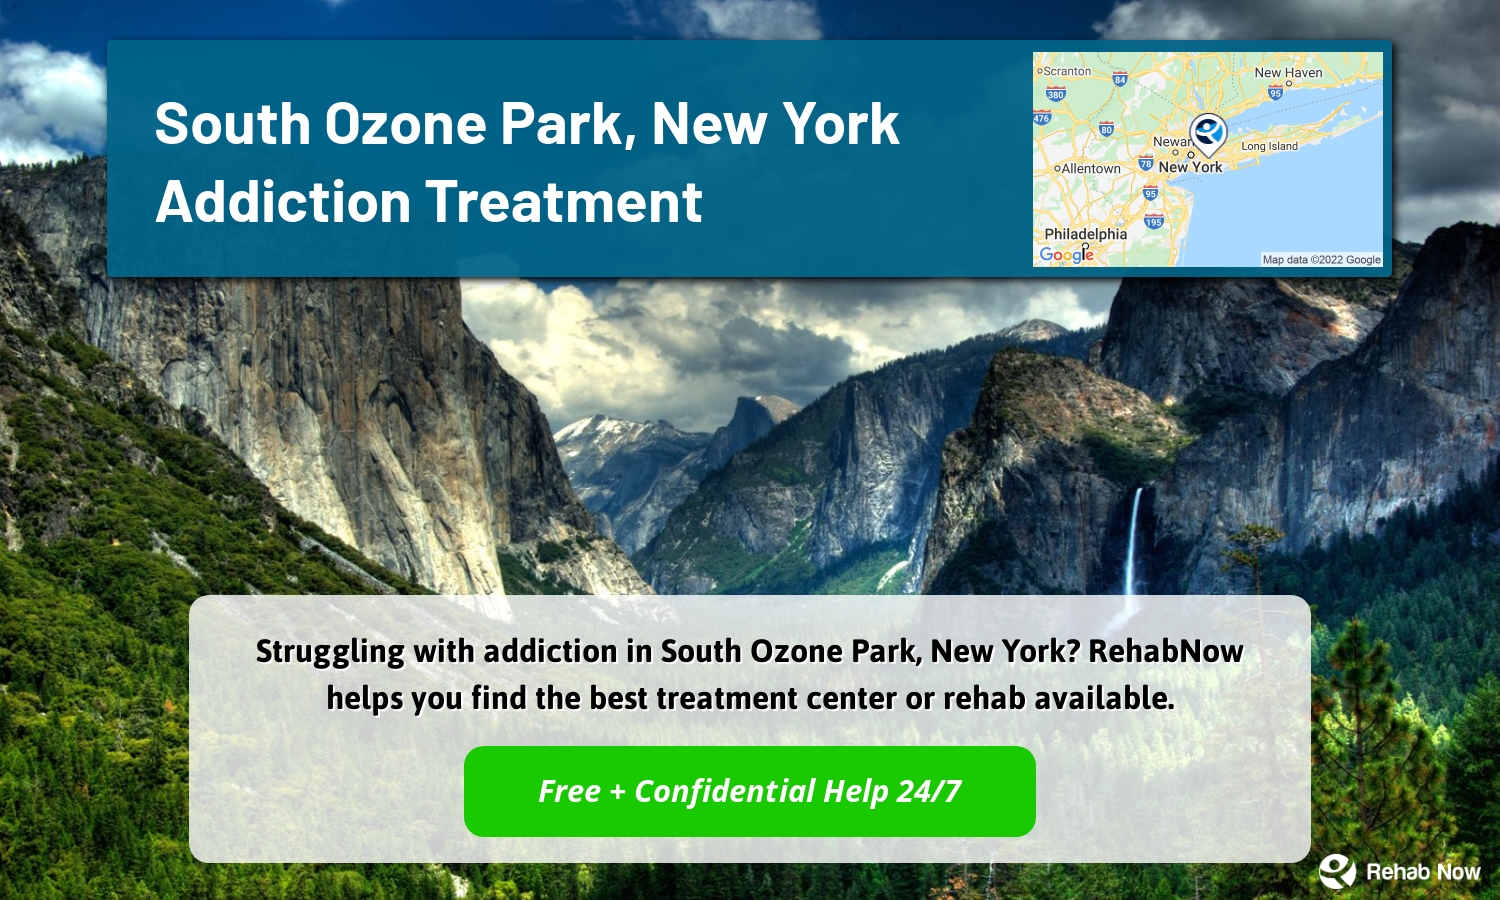 Struggling with addiction in South Ozone Park, New York? RehabNow helps you find the best treatment center or rehab available.